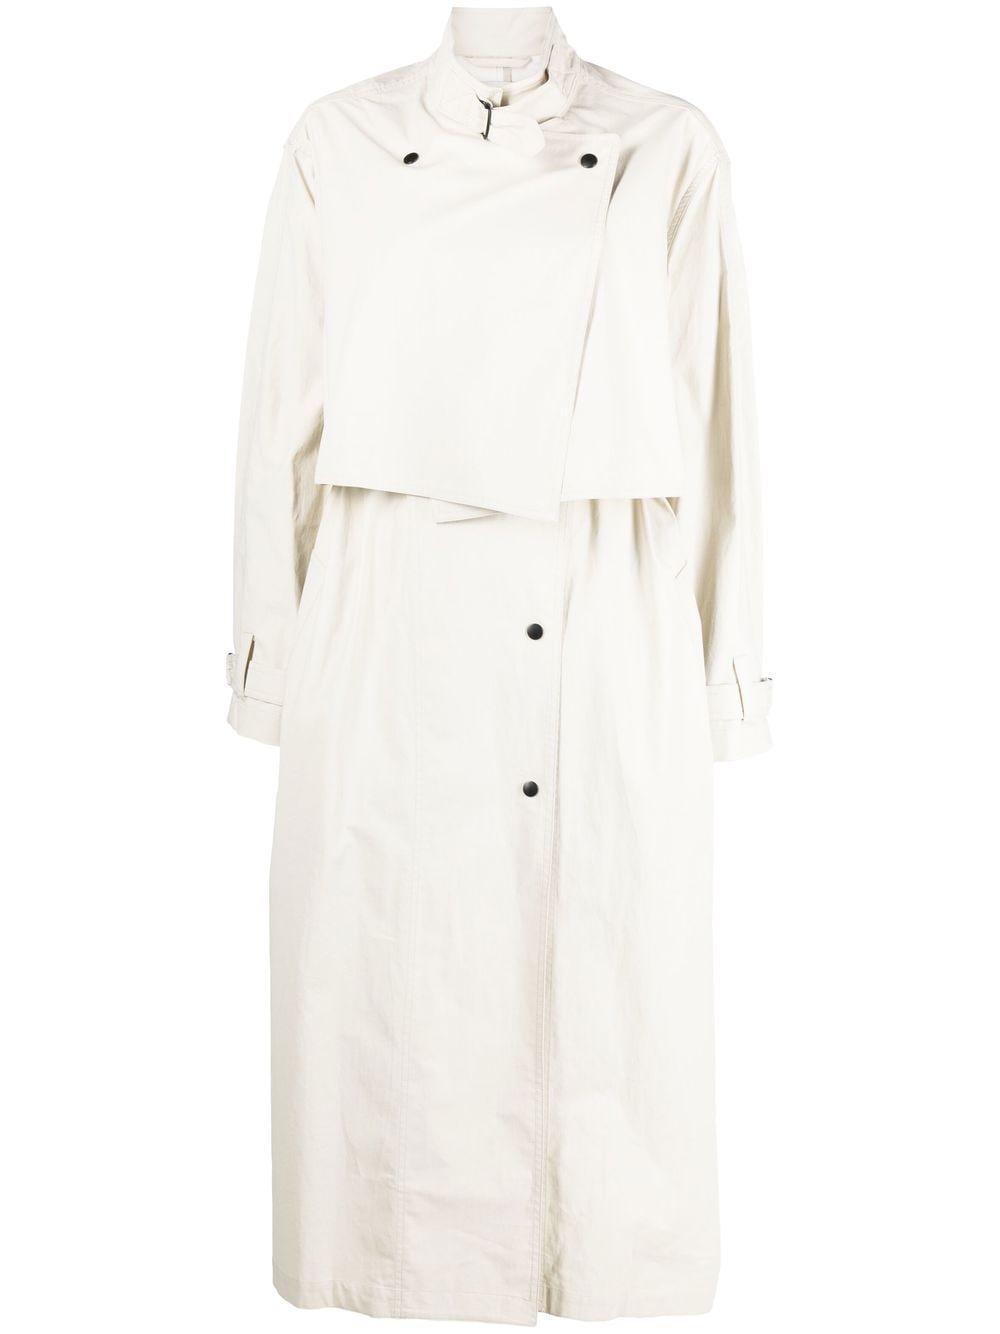 Isabel Marant Crisley Trench Coat in White | Lyst